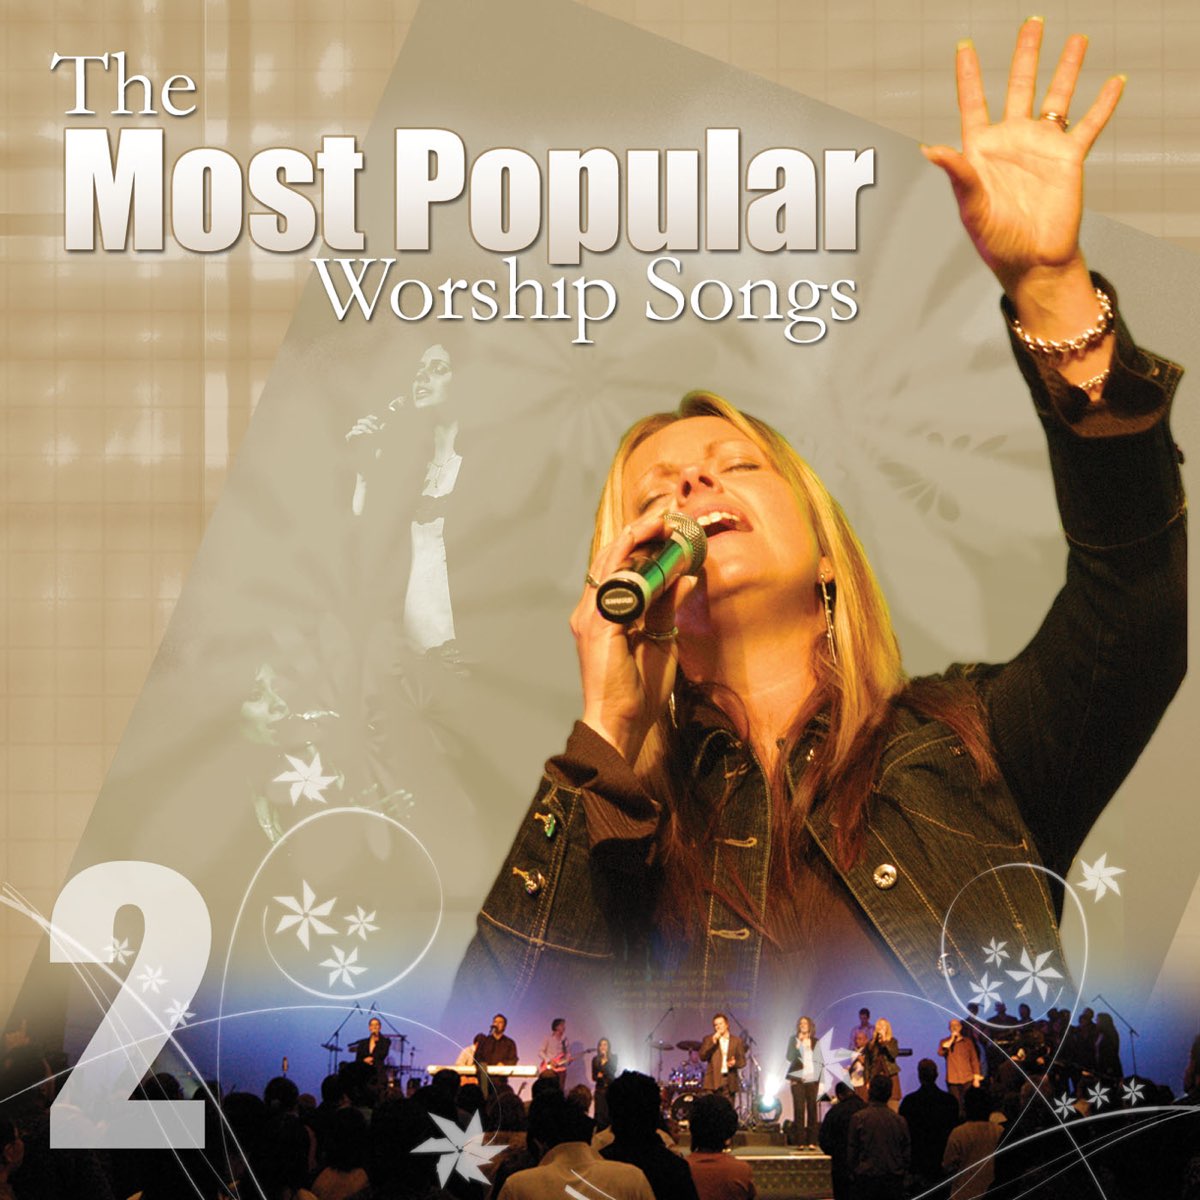 ‎The Most Popular Worship Songs Volume 2 by Oasis Worship on Apple Music